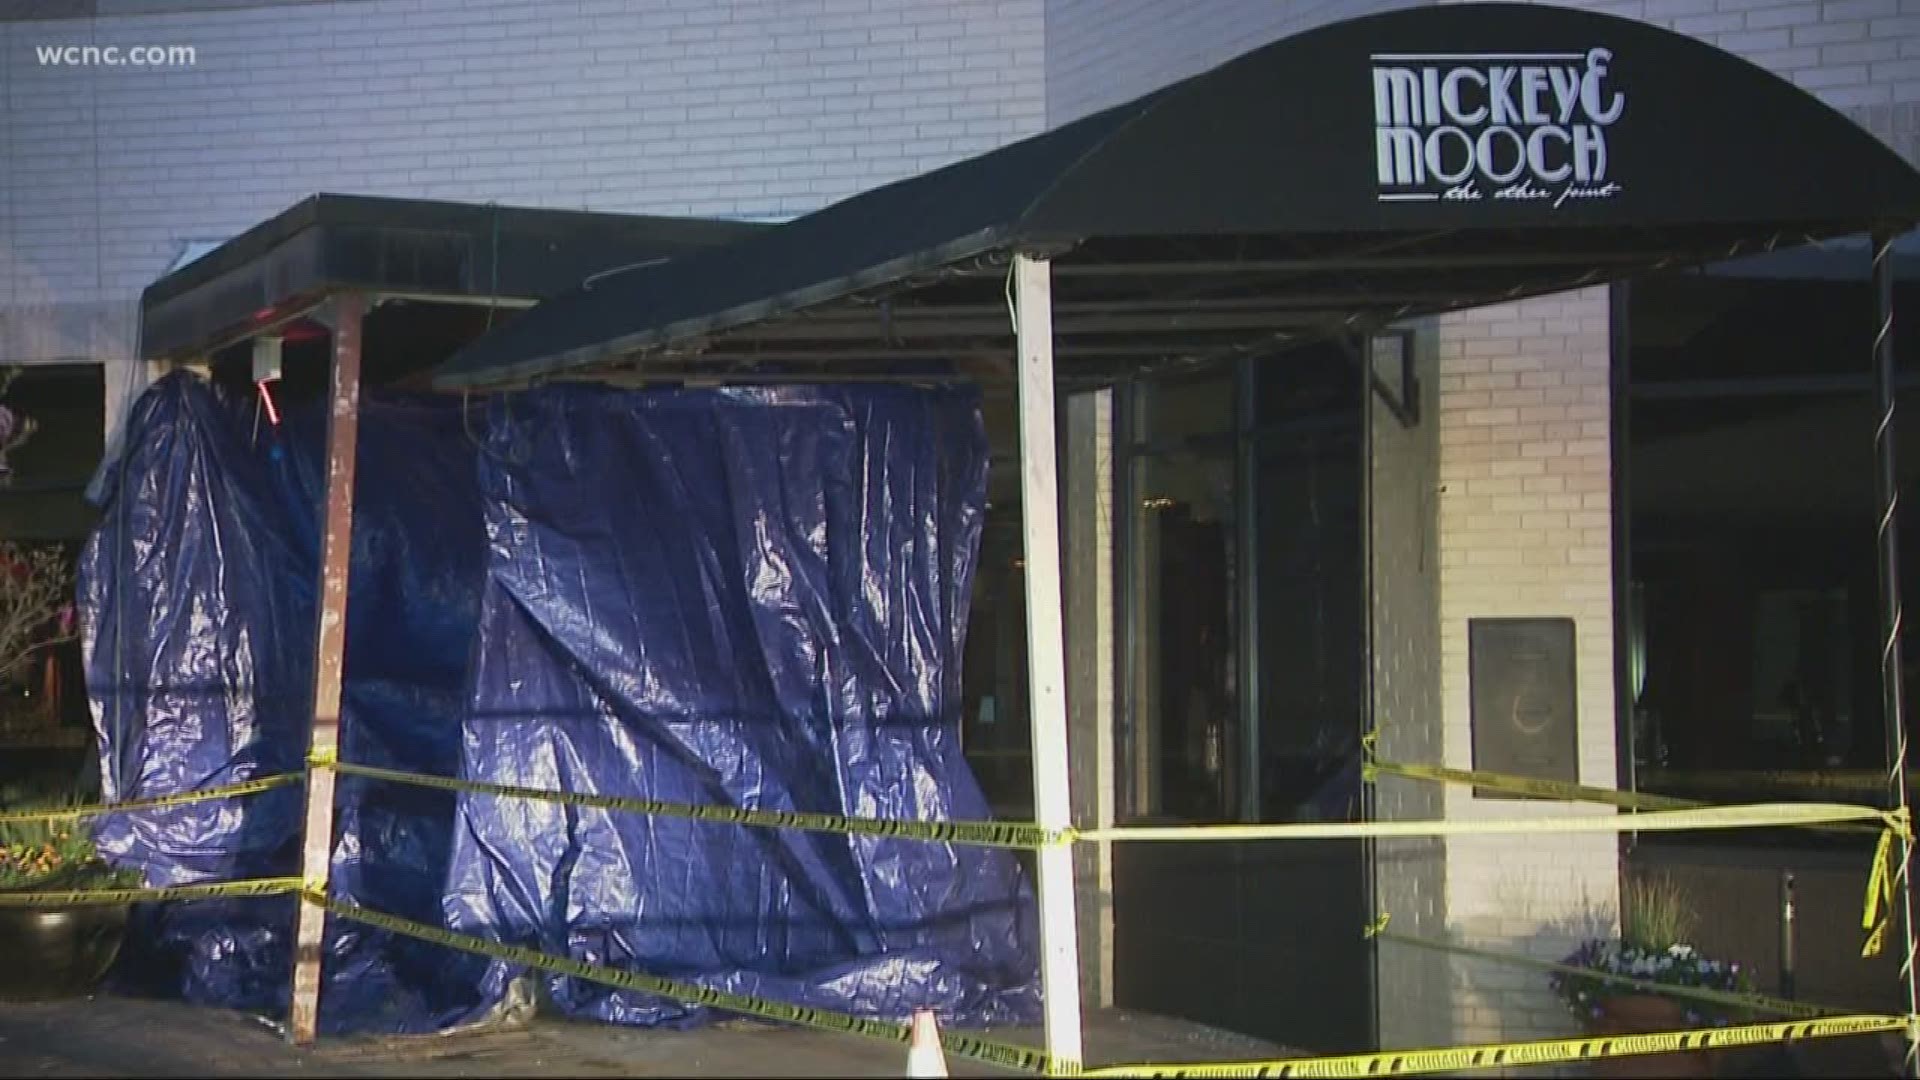 A car crashed in the Mickey and Mooch restaurant on Providence Road Saturday night.